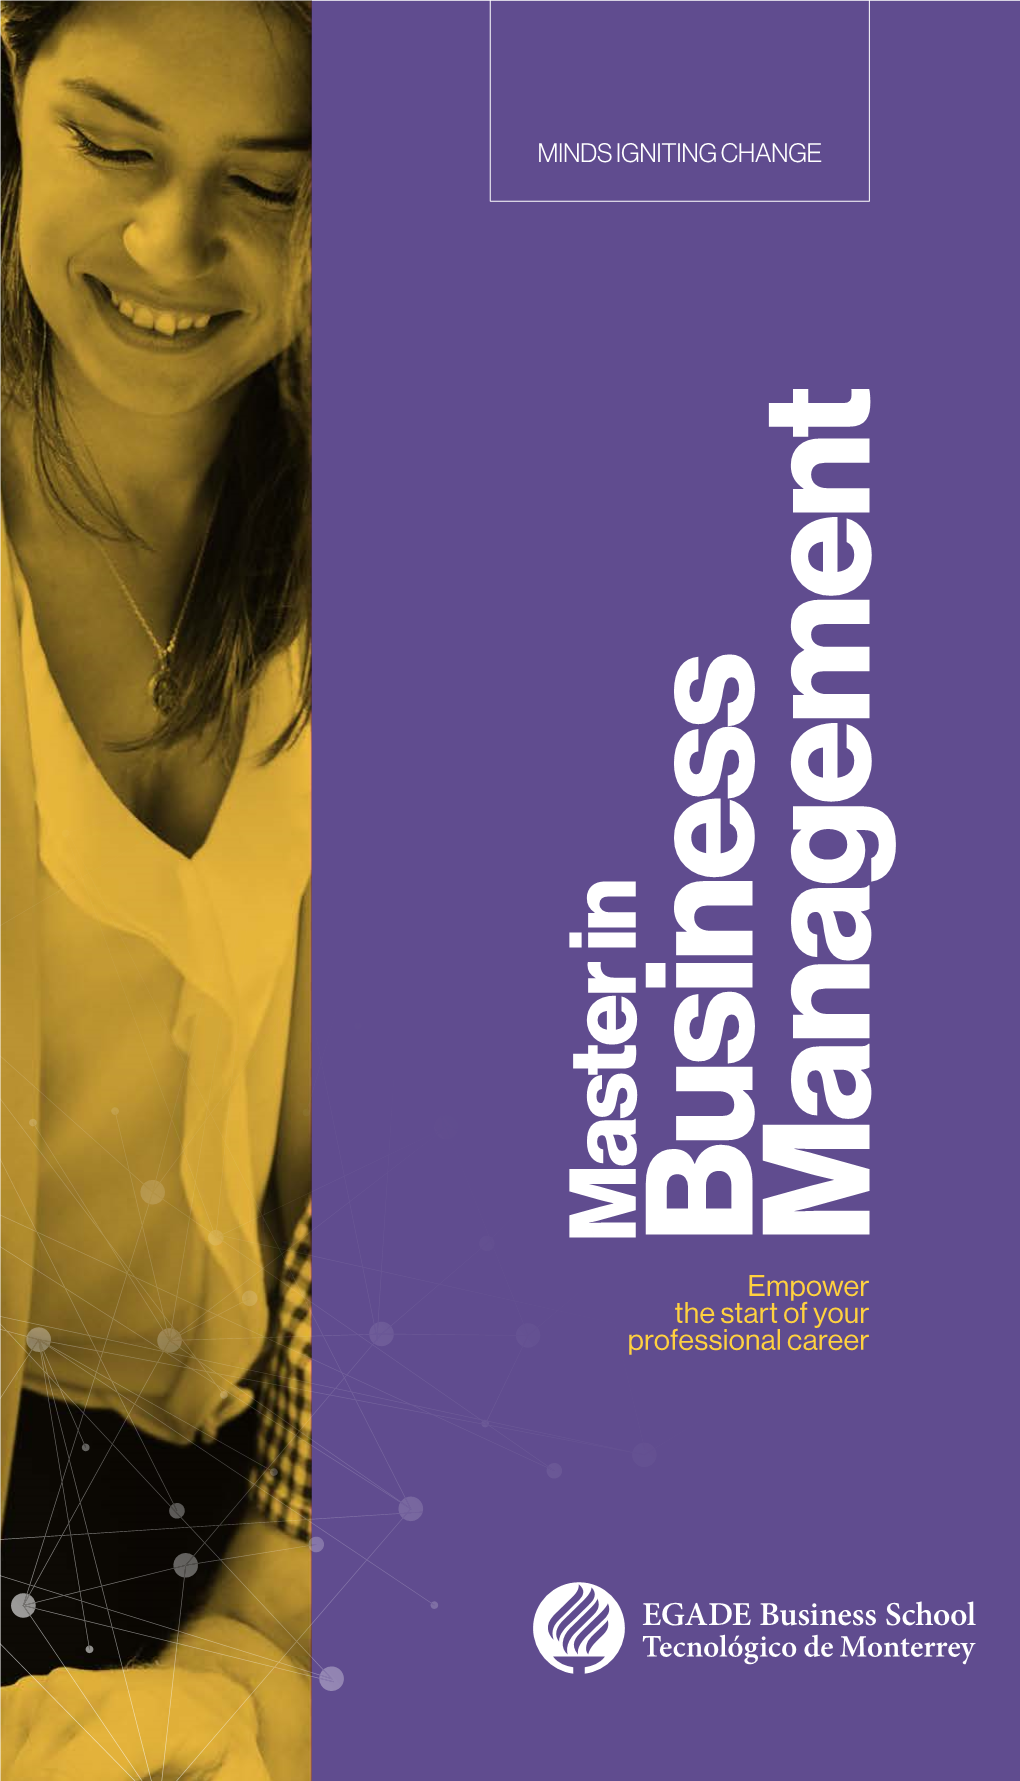 Master in Business Management?